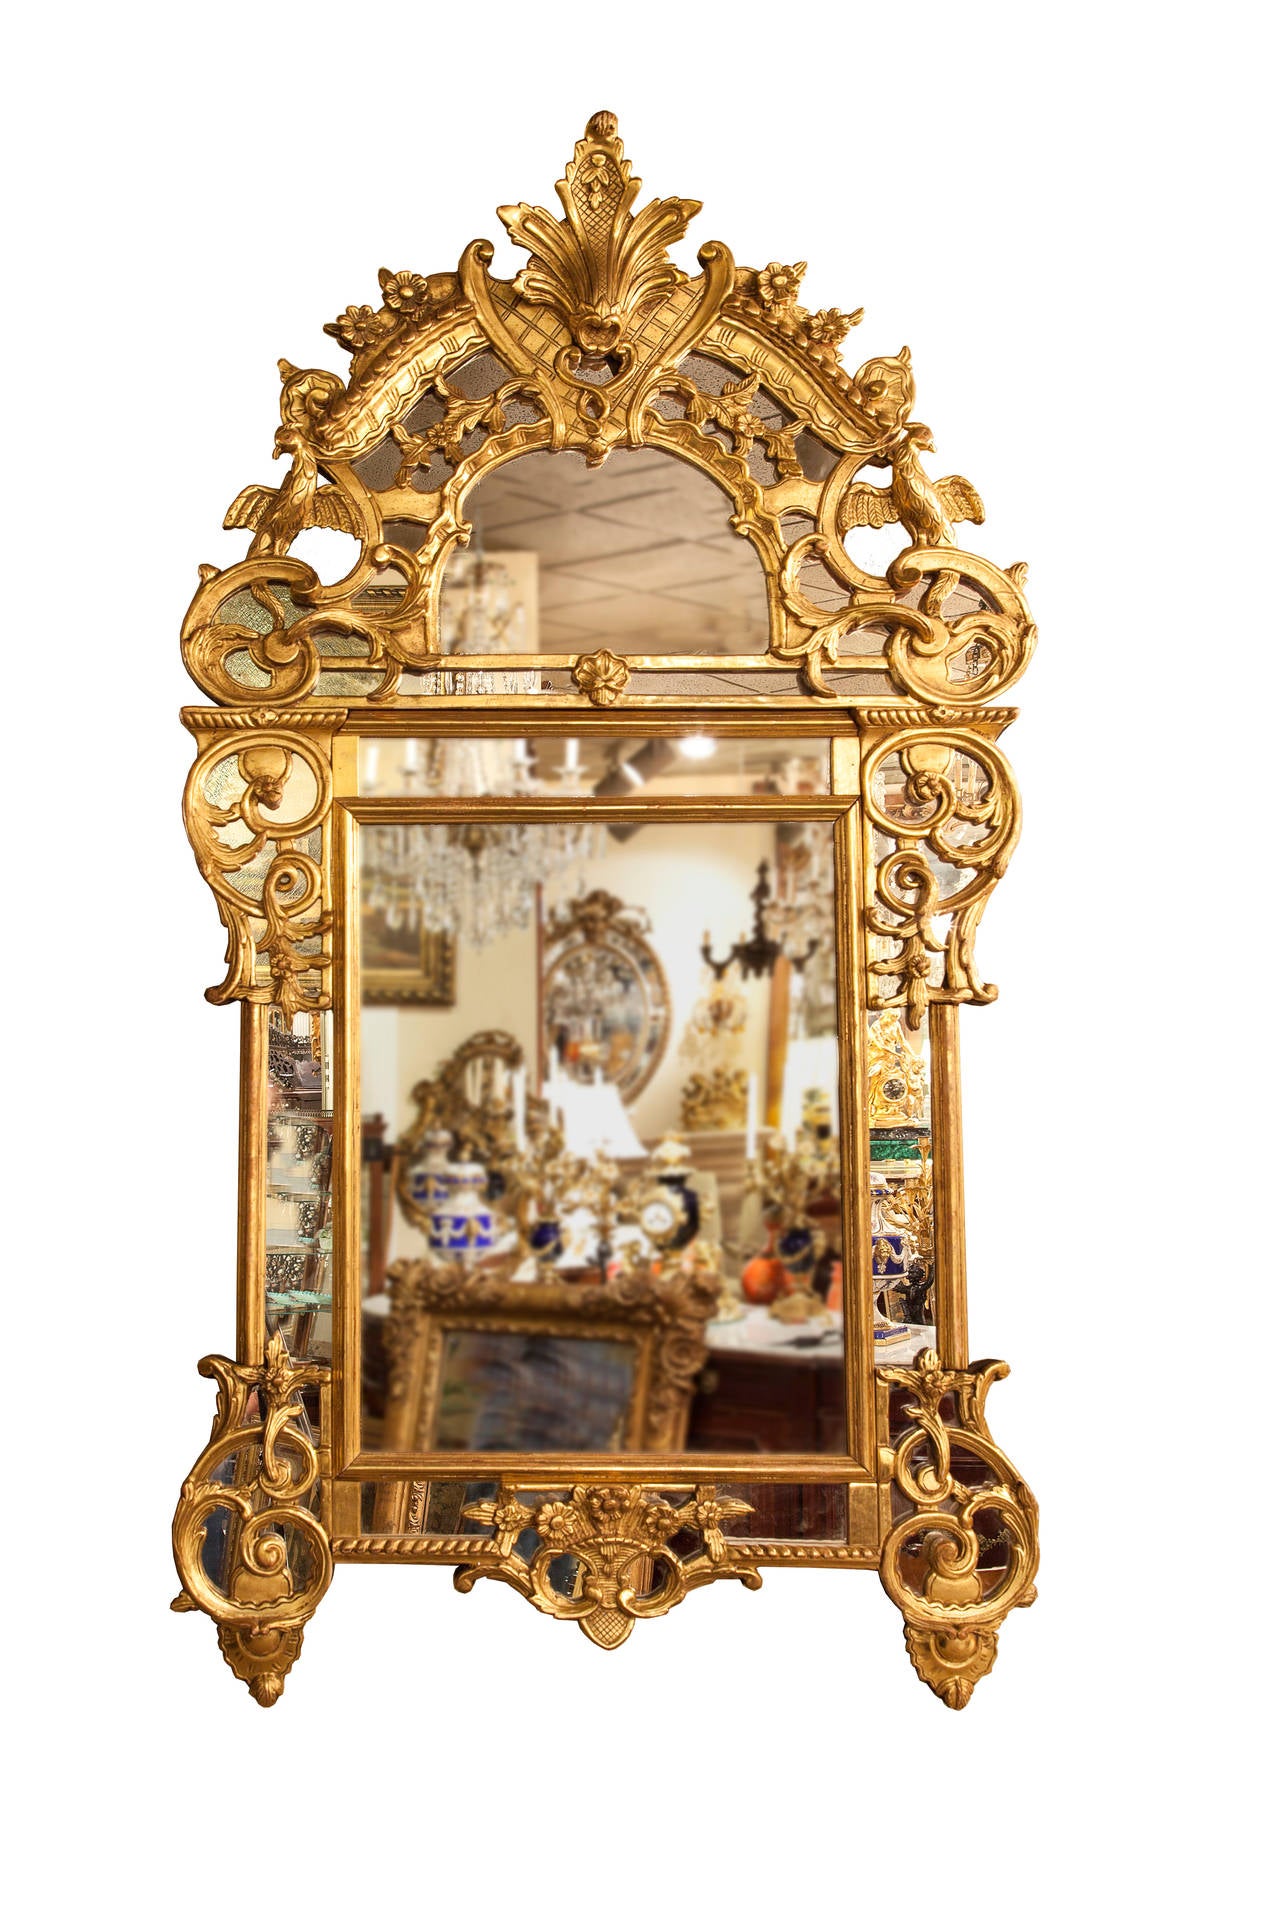 Acanthus plume crest surmounts hand carved, giltwood open work of stylized birds and exuberant scrollwork over original
Mirror plate. The main body of an inner rectangular frame
Supported by four volutes of open giltwood scrollwork overlaid 
On